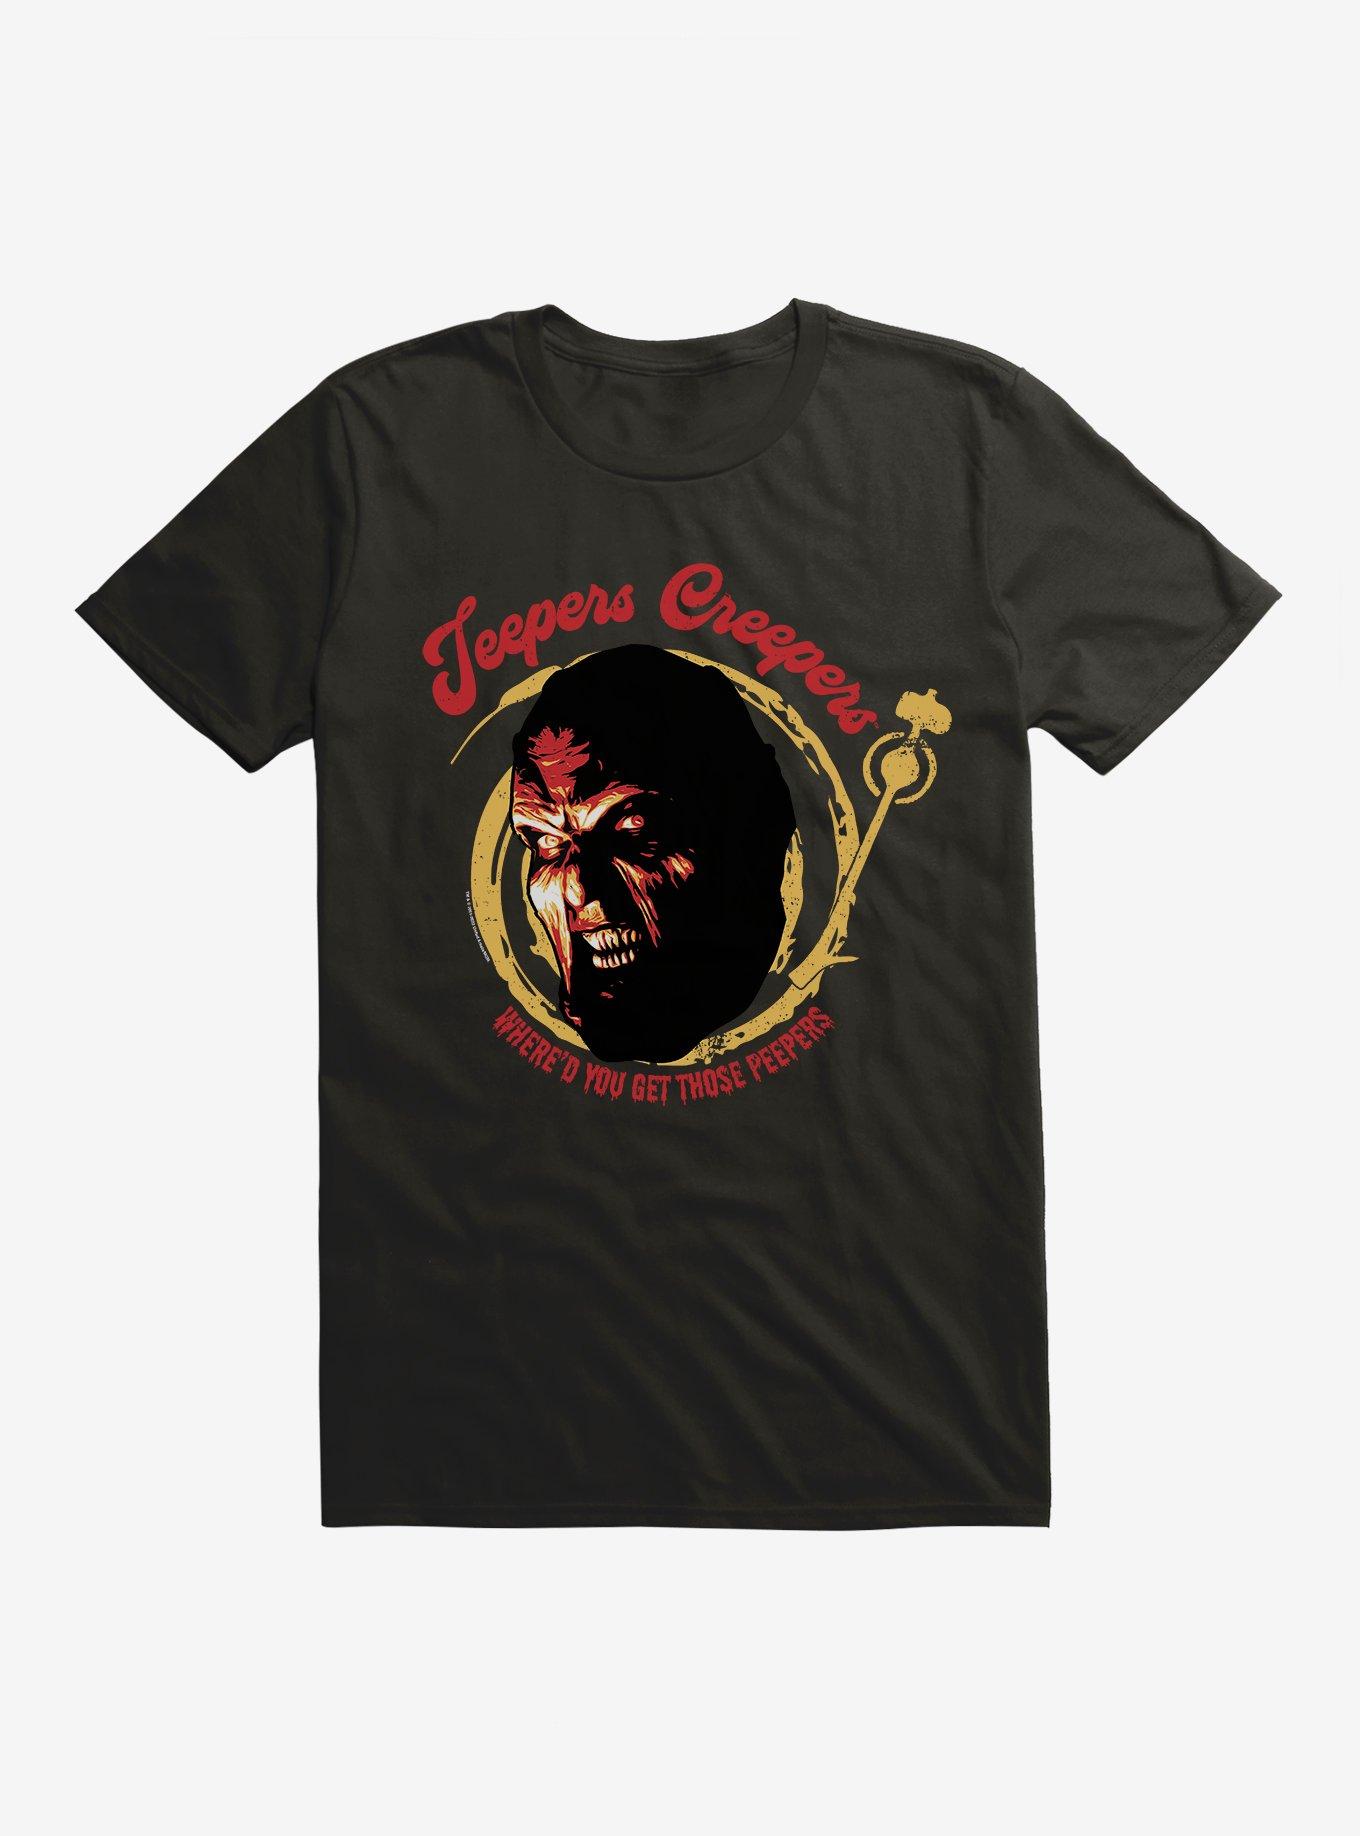 Jeepers Creepers Peepers T-Shirt, BLACK, hi-res